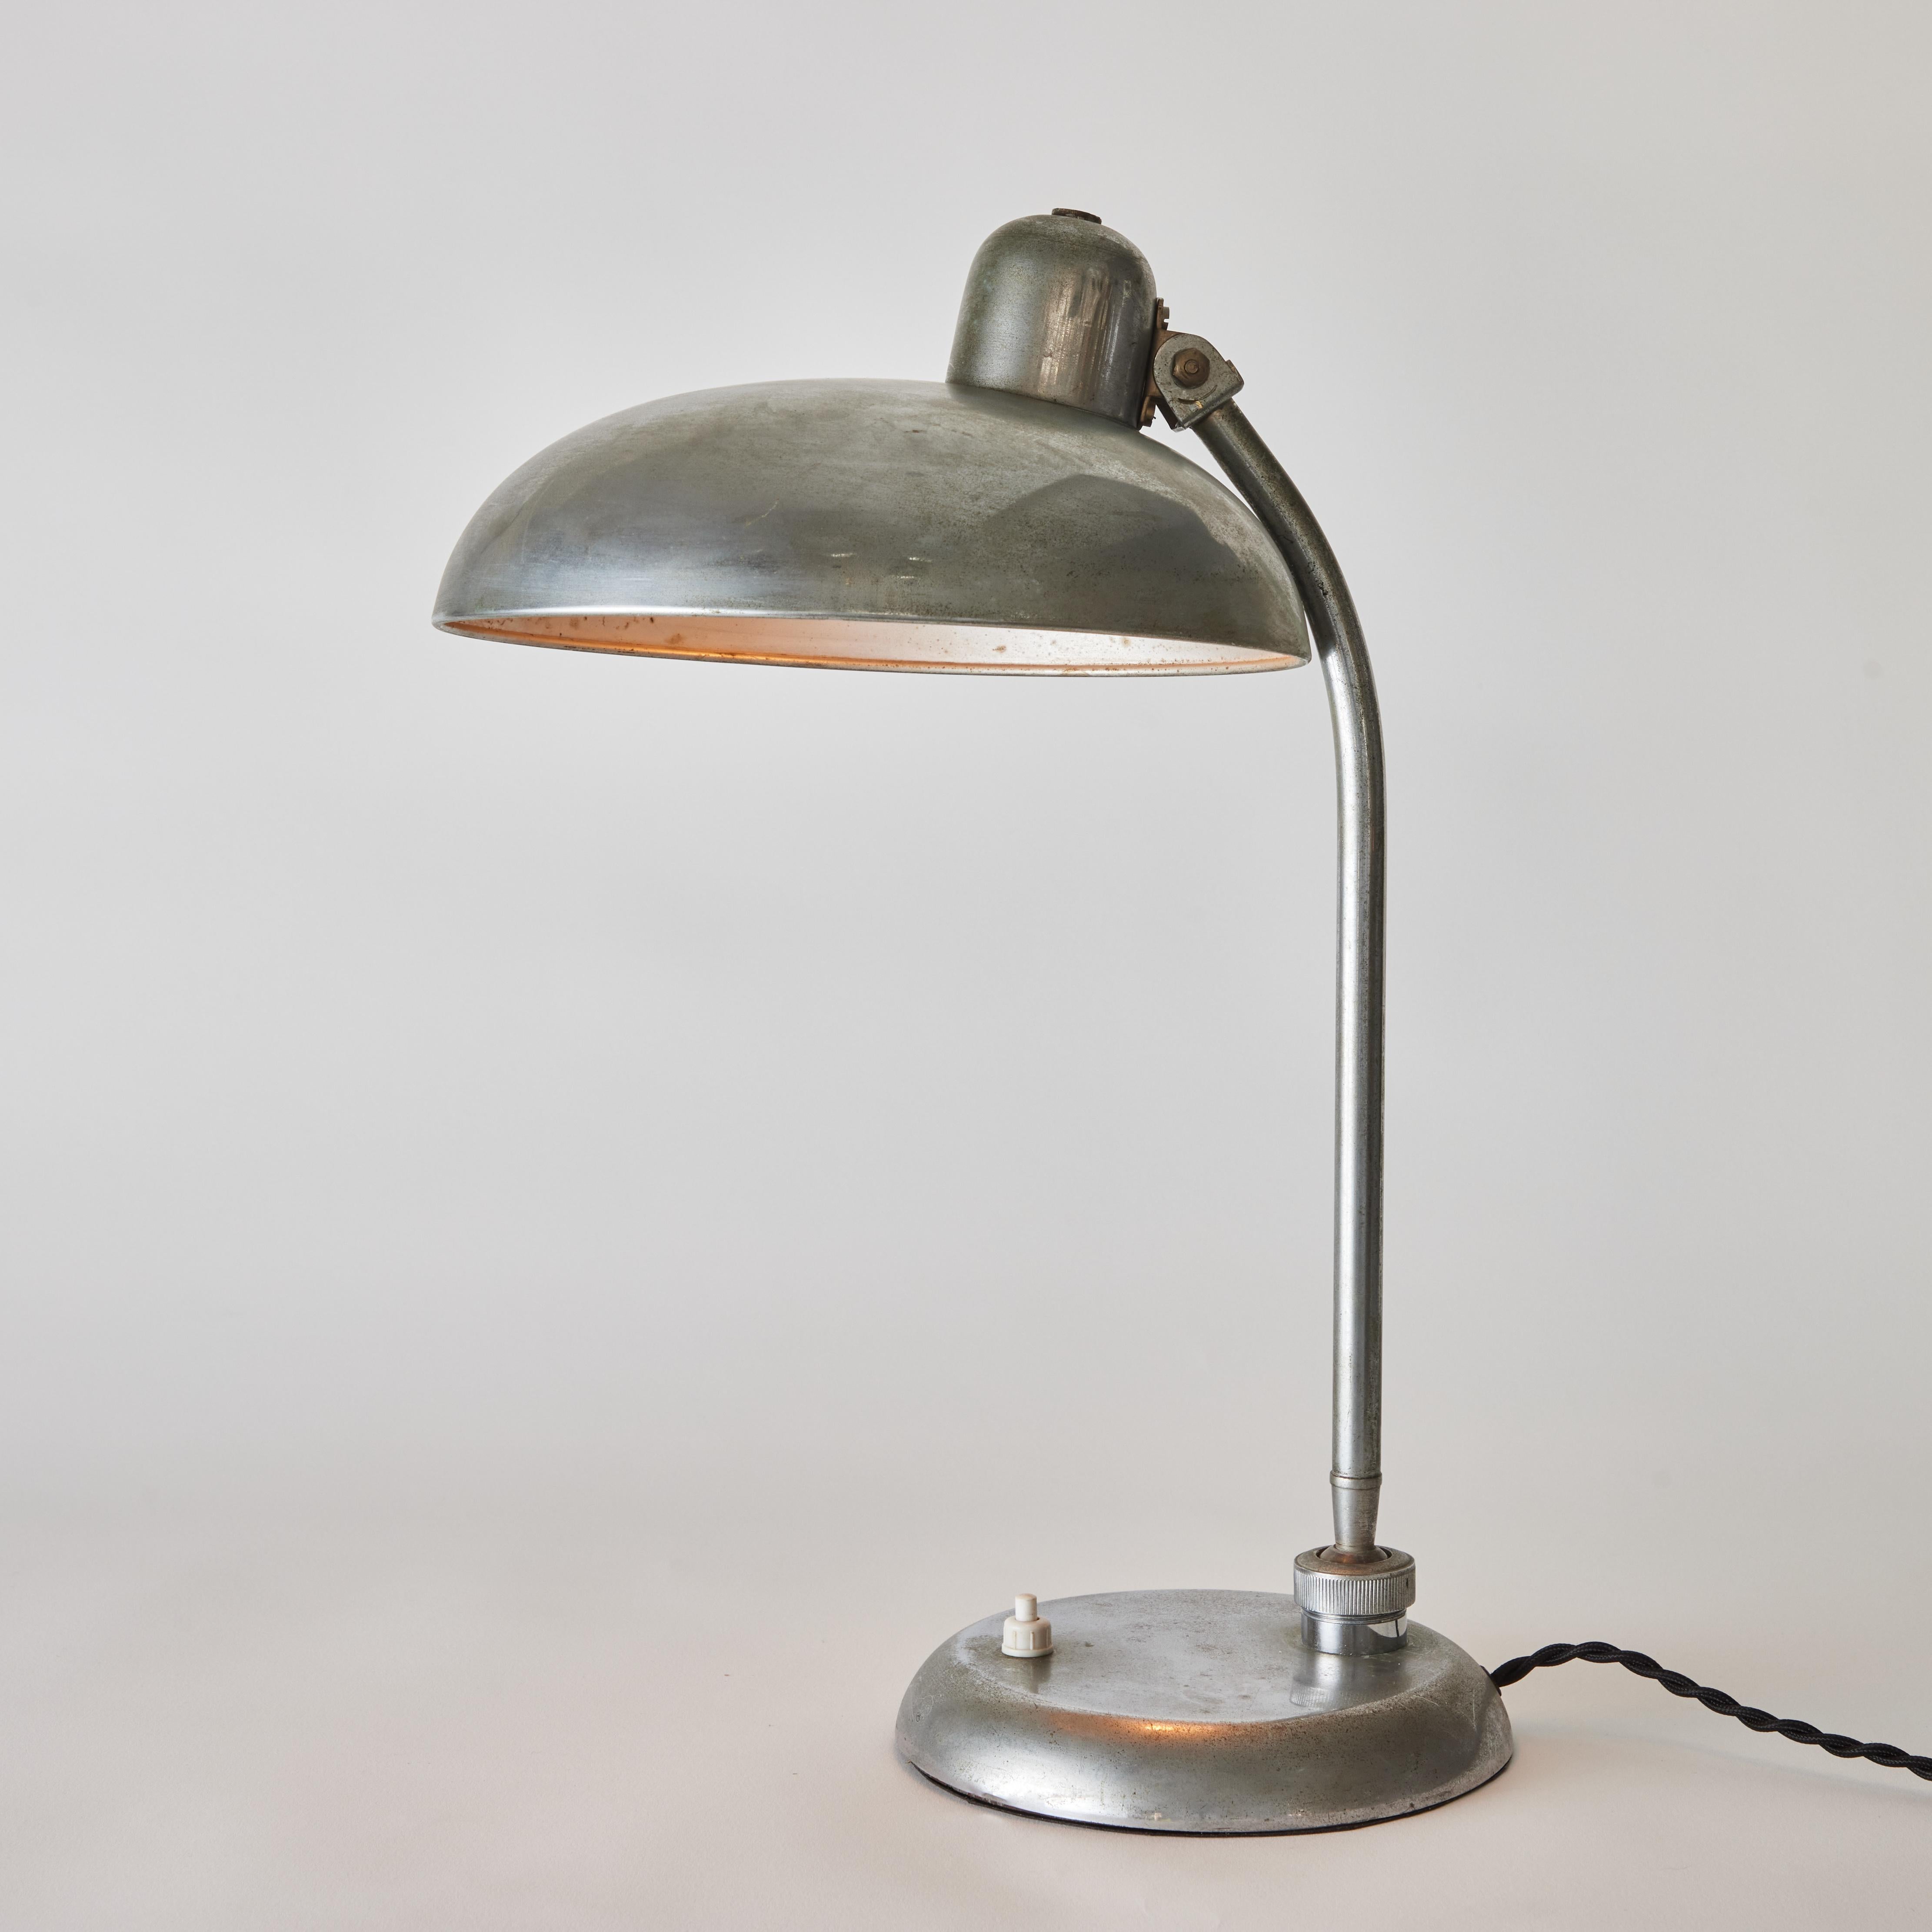 Scandinavian Modern 1940s Giovanni Michelucci Patinated Nickel Ministerial Table Lamp for Lariolux For Sale